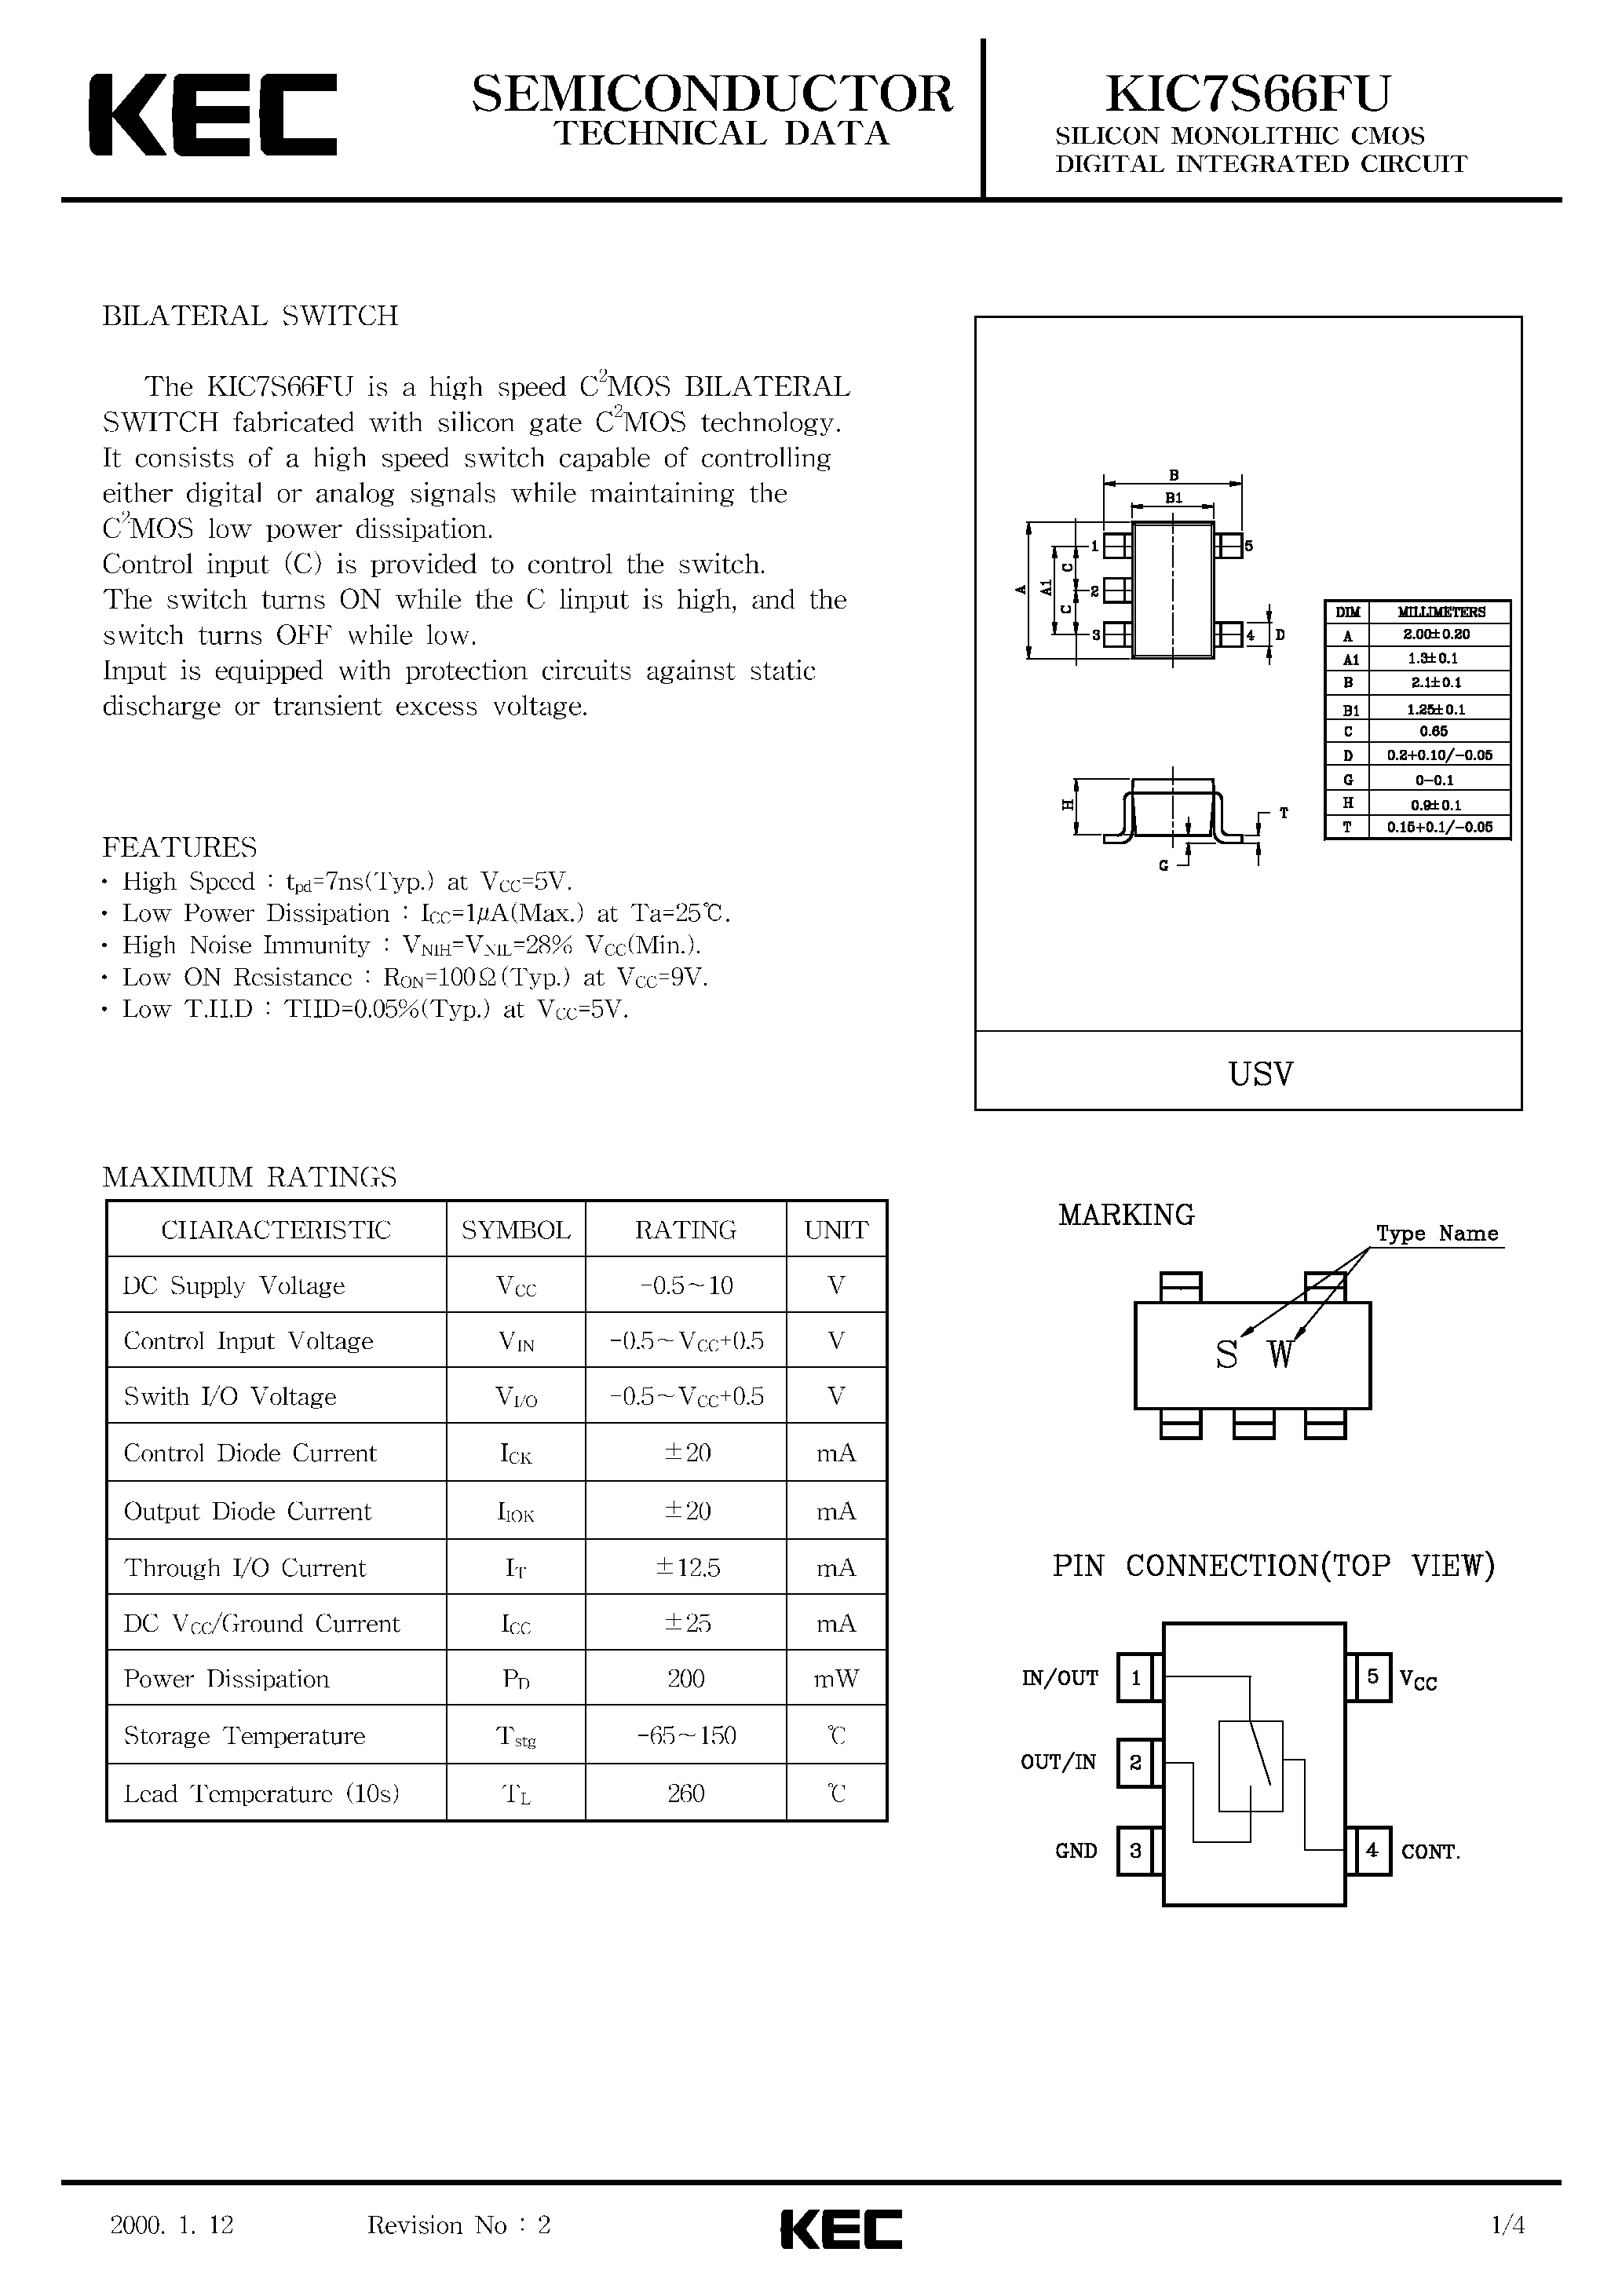 Datasheet KIC7S66 - SILICON MONOLITHIC CMOS DIGITAL INTEGRATED CIRCUIT(BILATERAL SWITCH) page 1